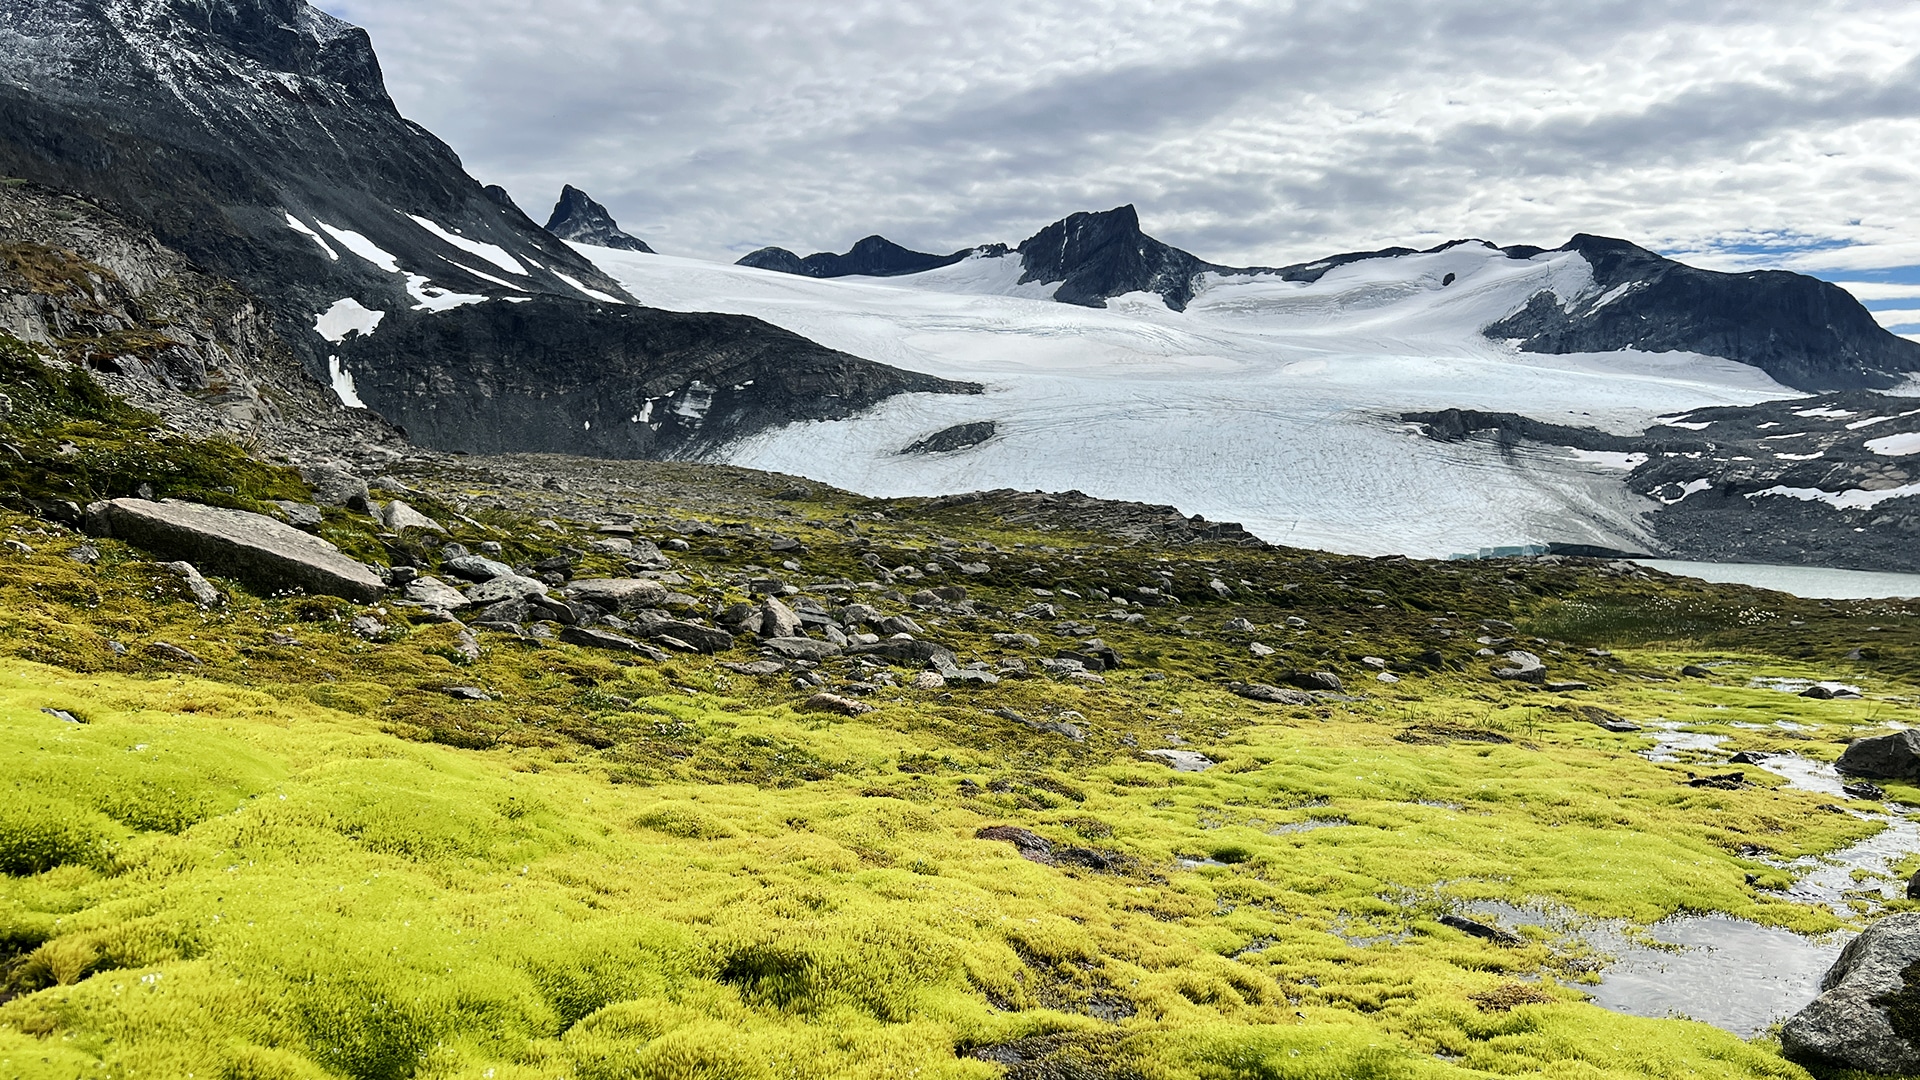 The mountain tops of Store Smørstabbtinden is covered in snow at summertime.